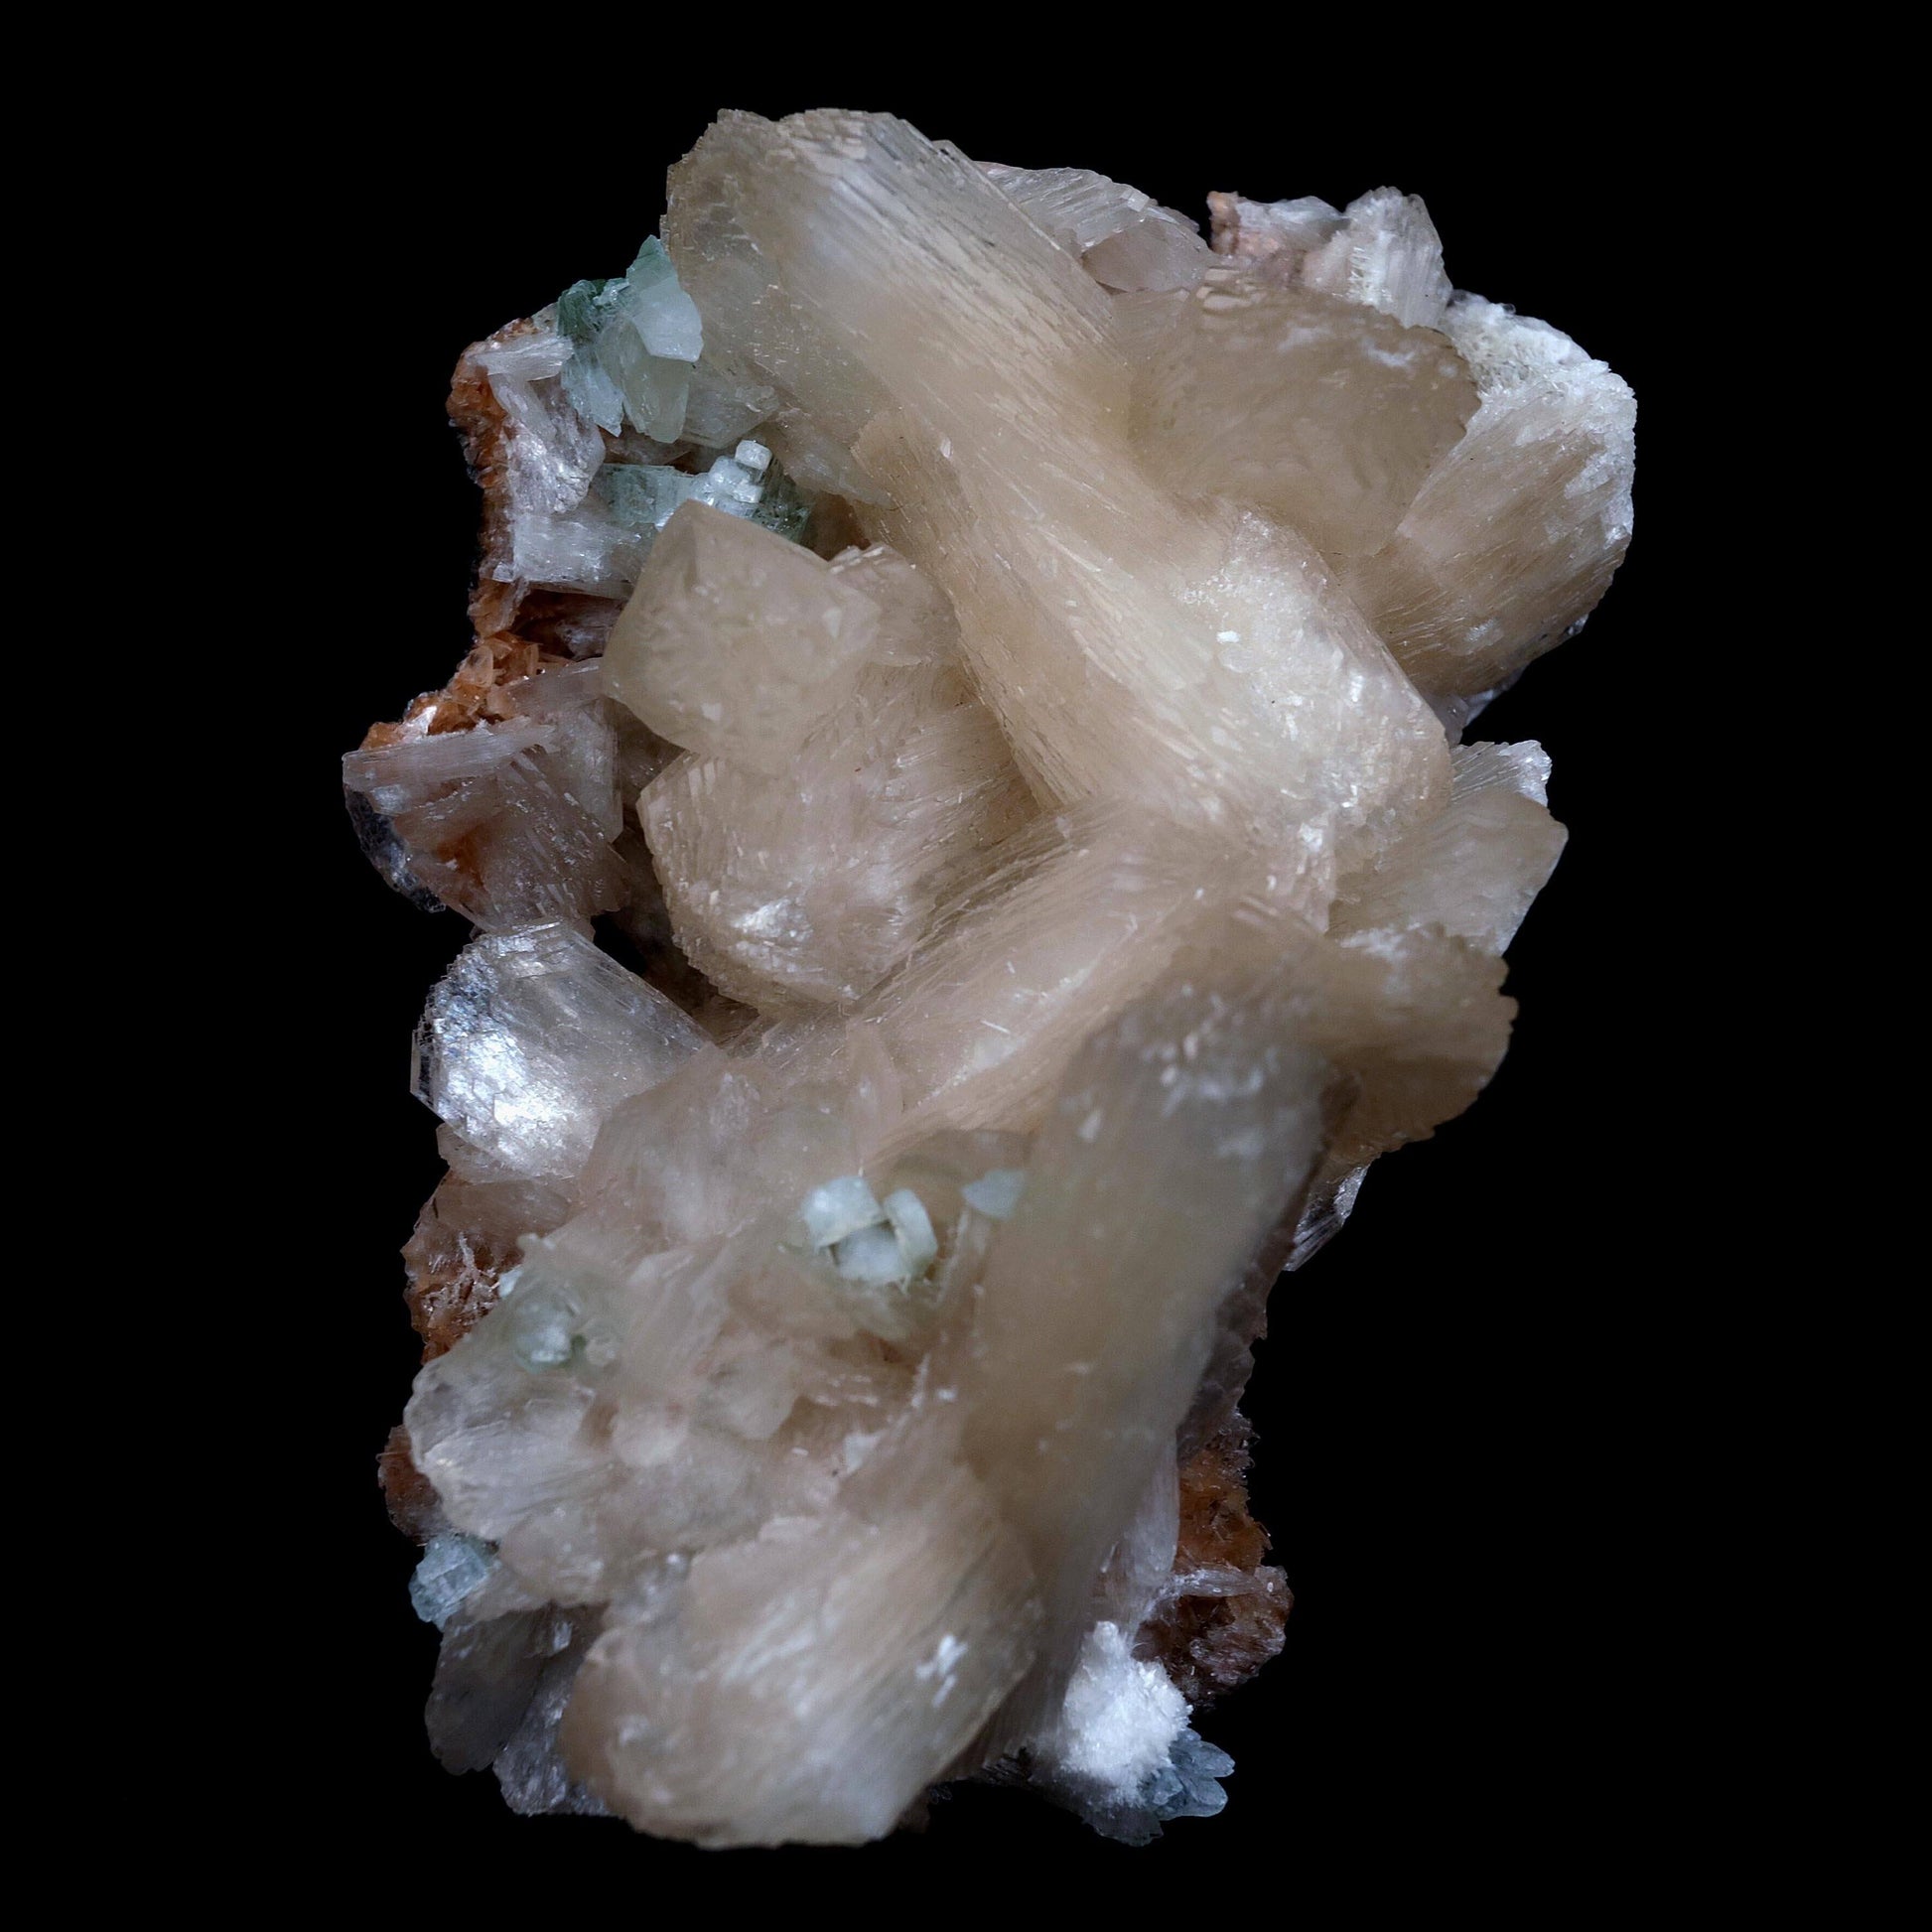 Powellite with Stilbite Rare Find fluorescent Natural Mineral Specimen…  https://www.superbminerals.us/products/powellite-with-stilbite-rare-find-fluorescent-natural-mineral-specimen-b-4631  Features: Elegant and adorable miniature powellite and stilbite from recent finds at Jalgaon. The sharp textbook, dipyramidal, pleasing straw-yellow powellite crystal has high luster, excellent translucence, and striking gem corners with etched frosted white faces. The crystal is beautifully set on pearlescent 